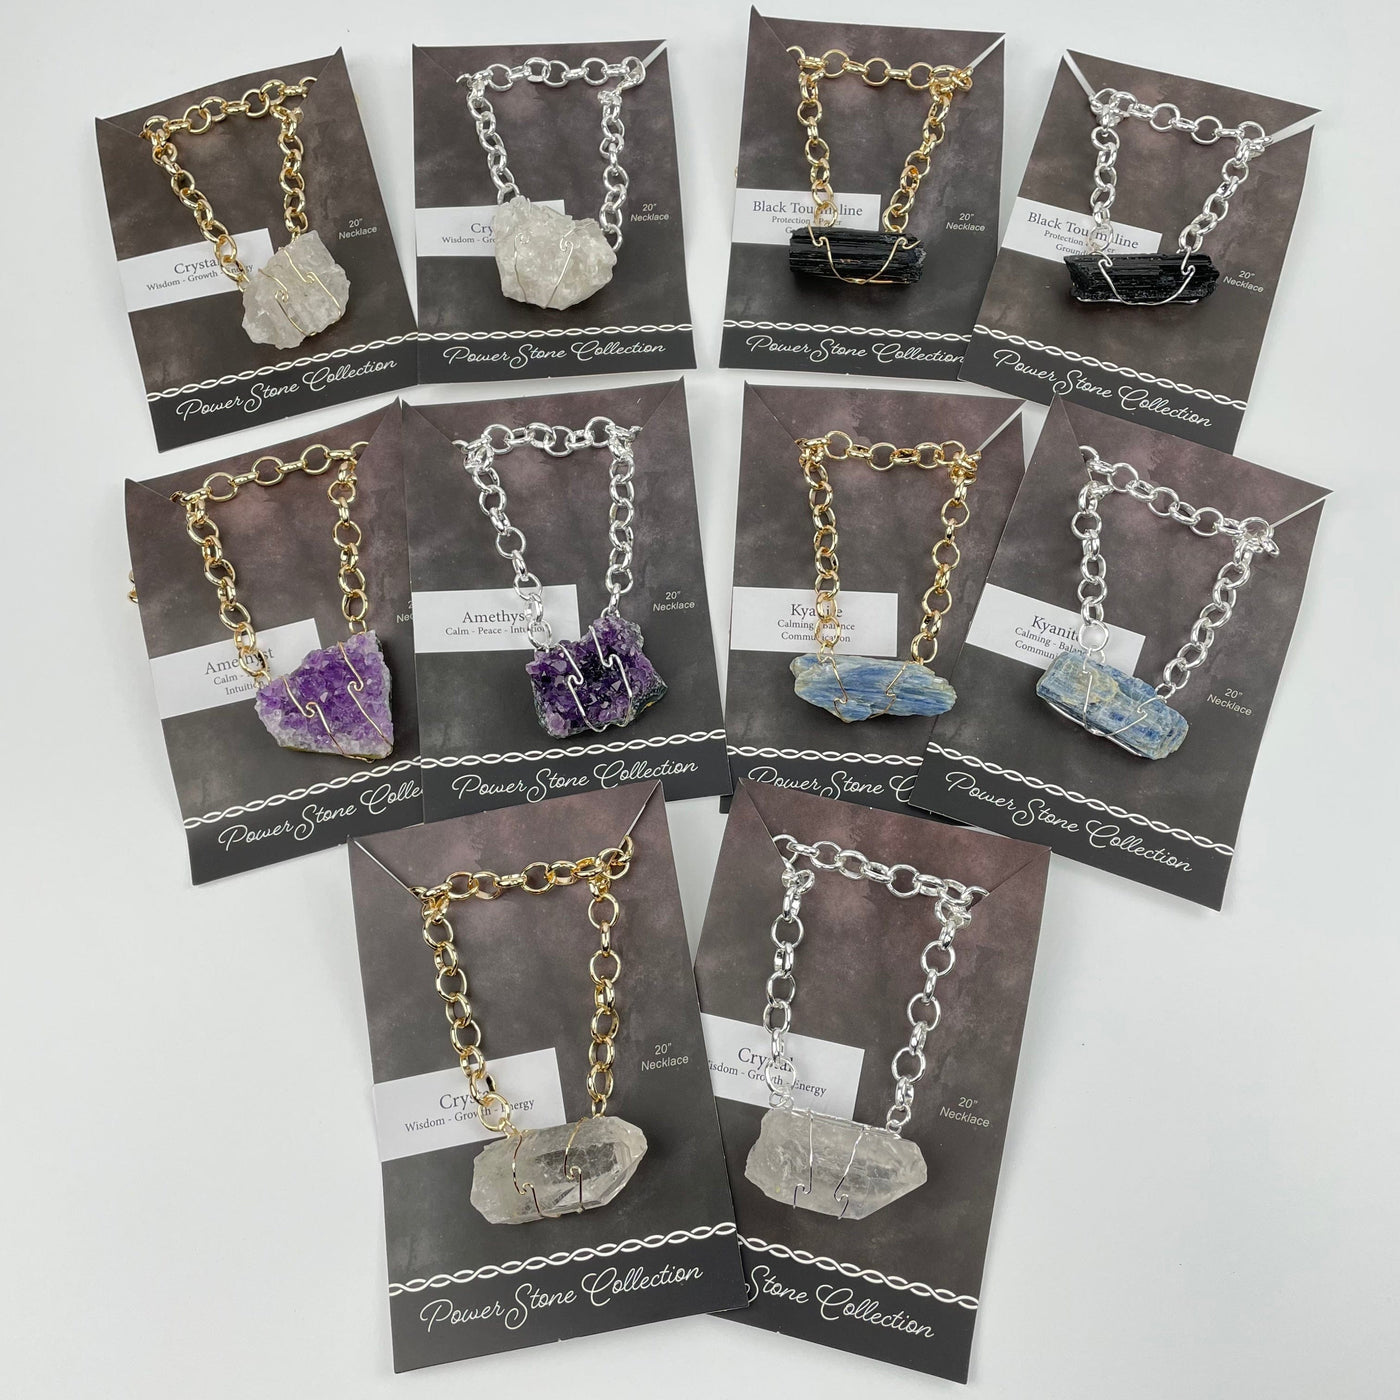 Power Stone Crystal Necklaces displayed to show the differences in the crystal types and sizes